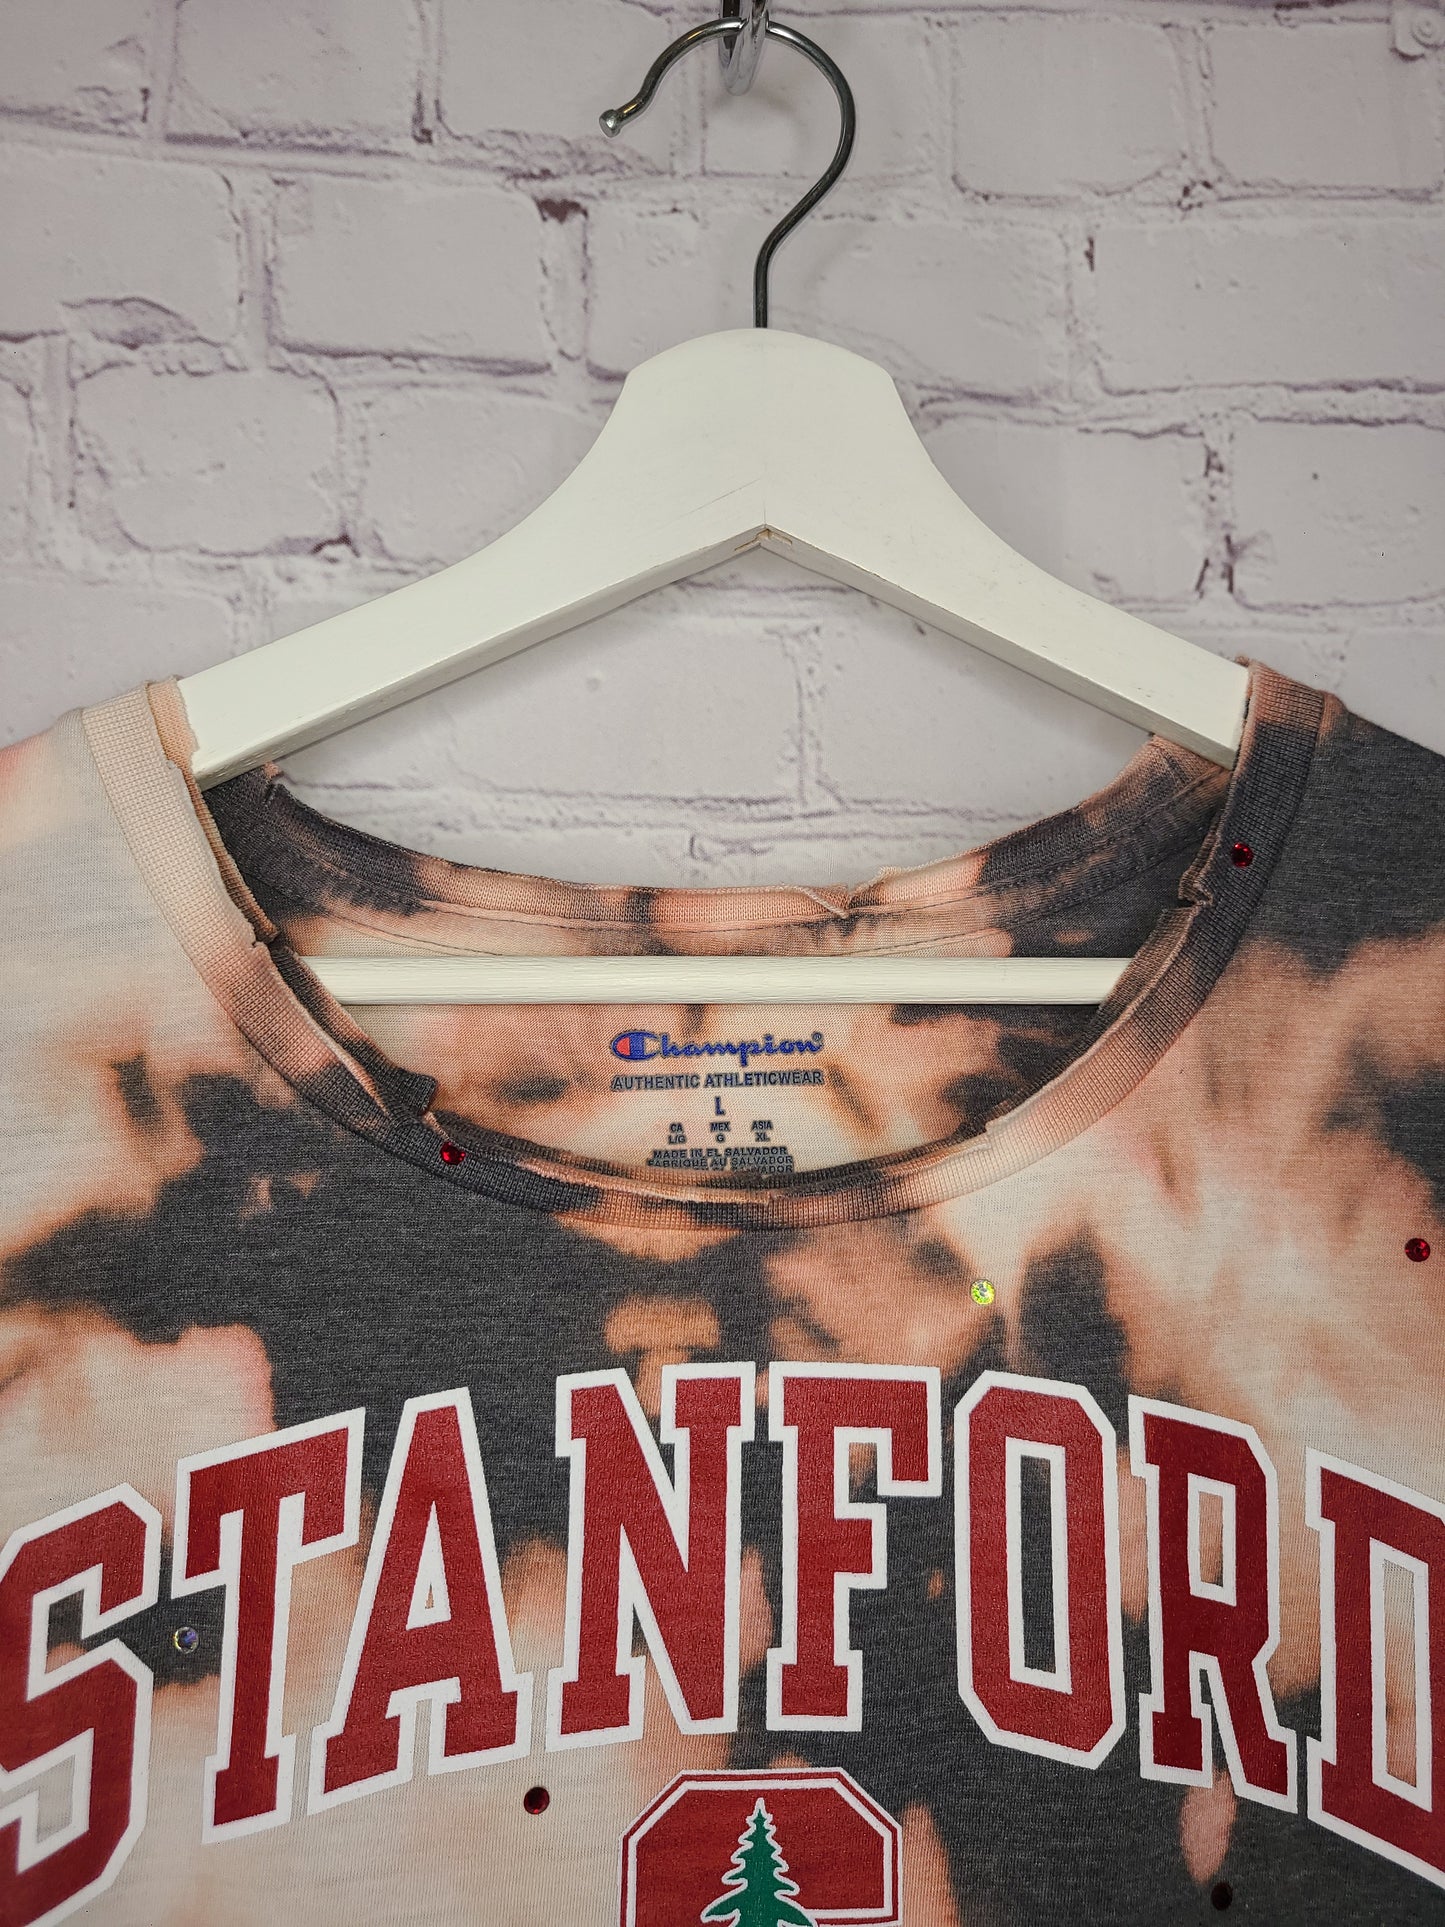 Stanford University Fitted Tee